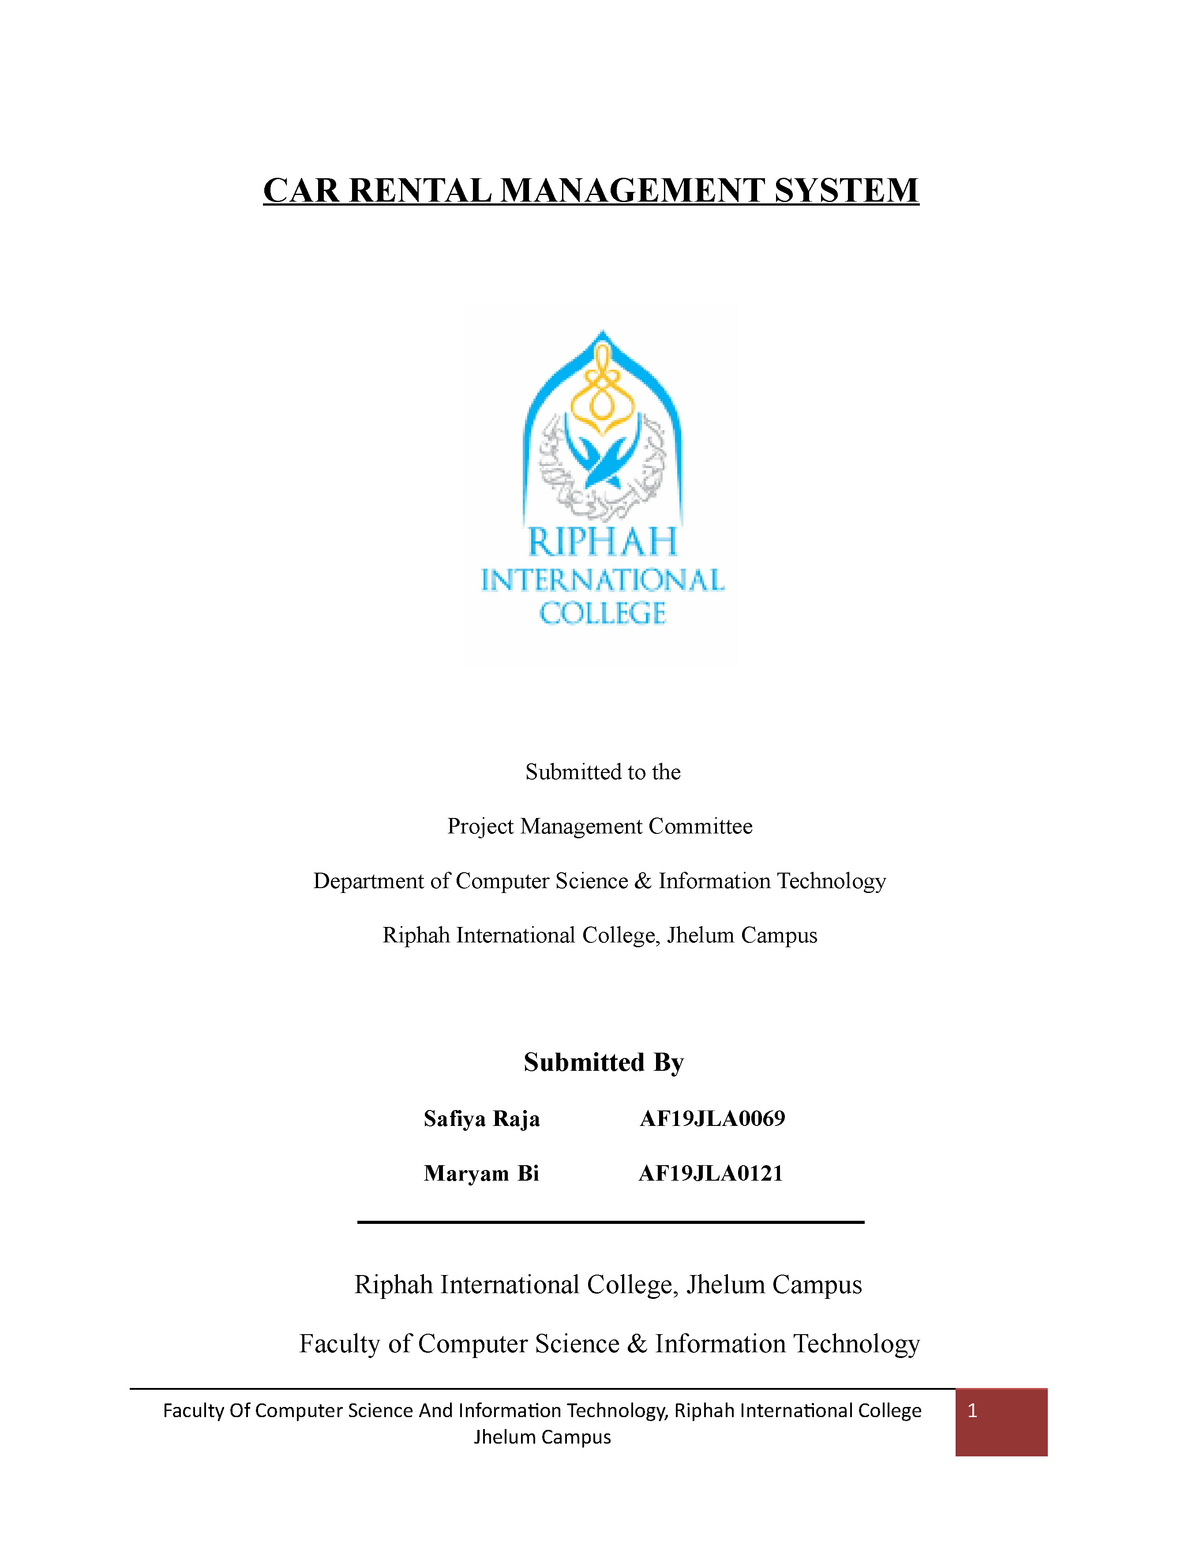 literature review on car rental system project